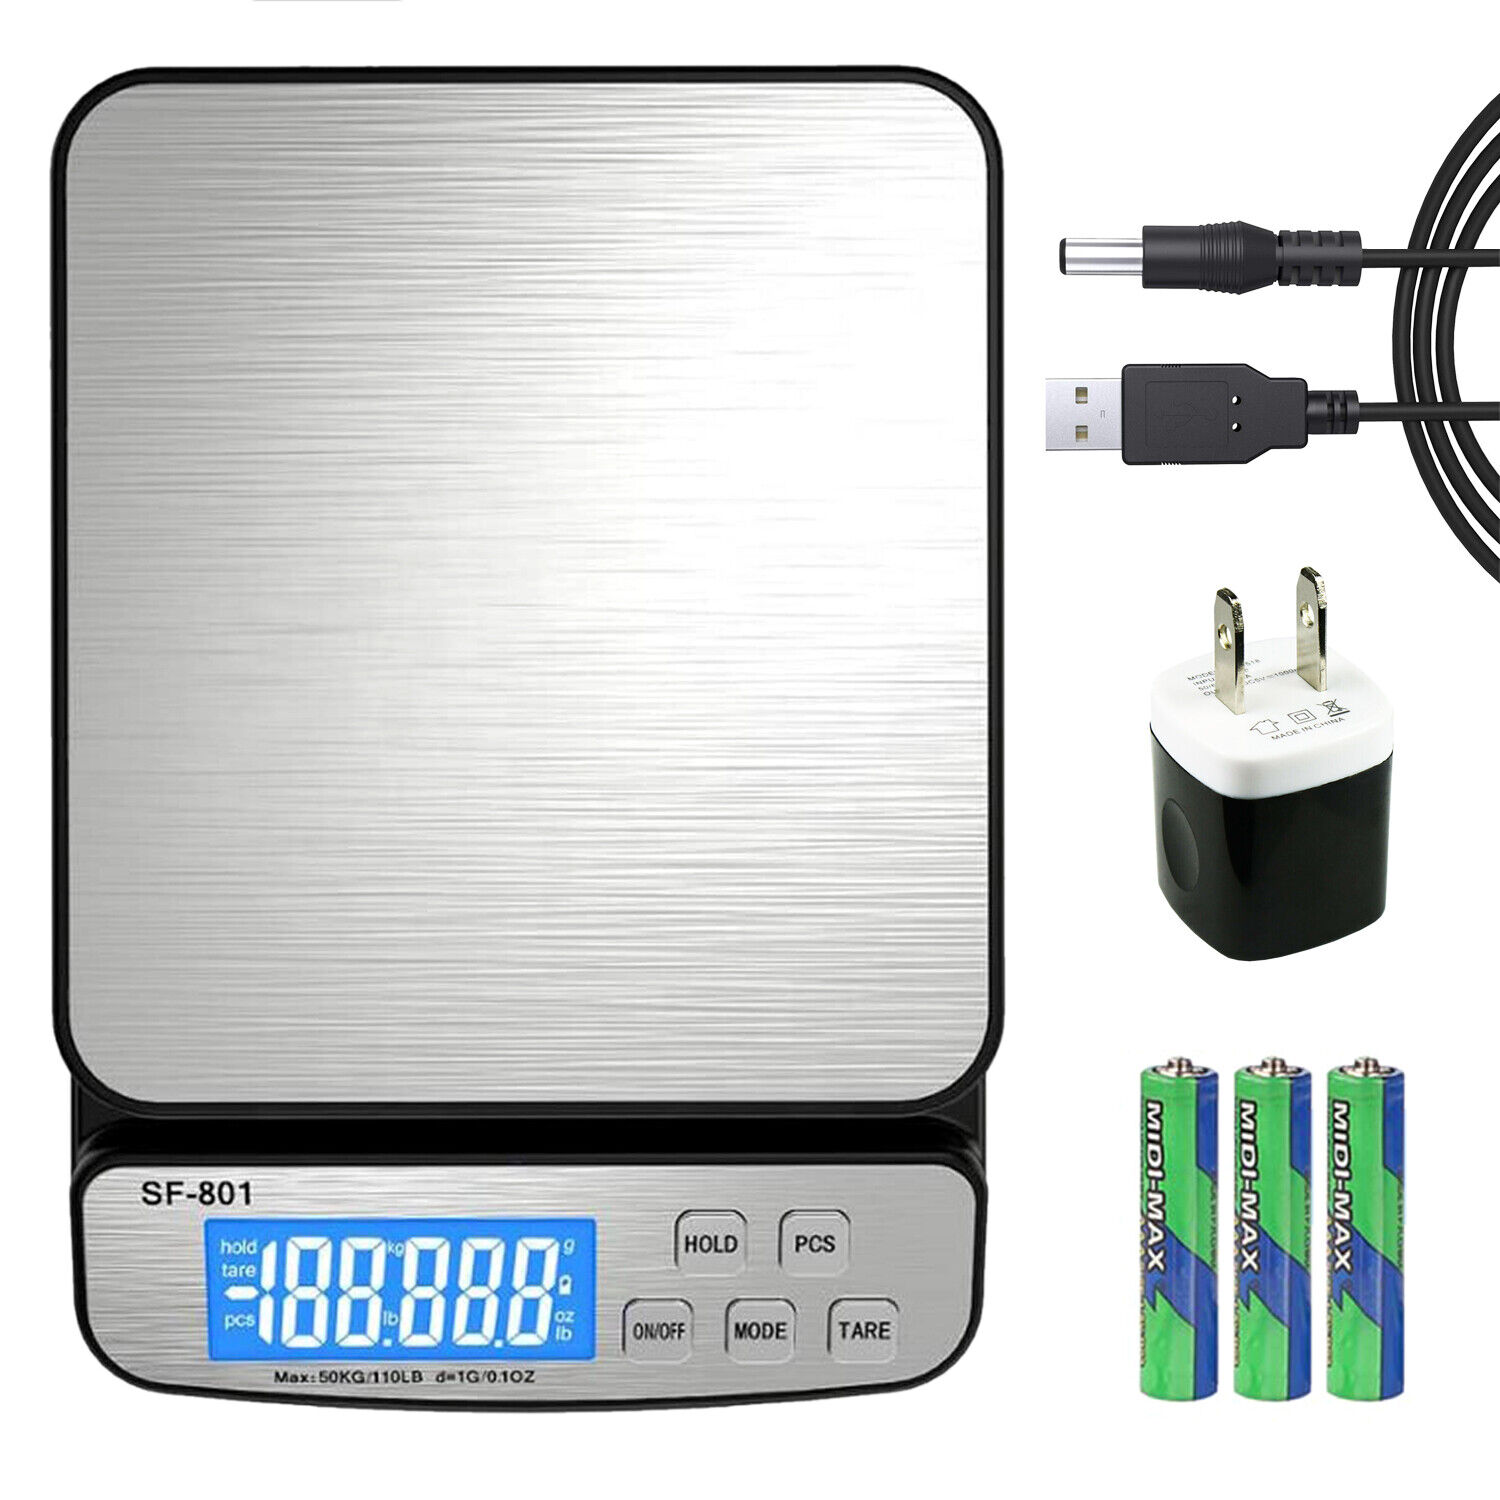 110 LB x 1g Digital Scale Postal Shipping Scale AC Adapter Battery SF-801